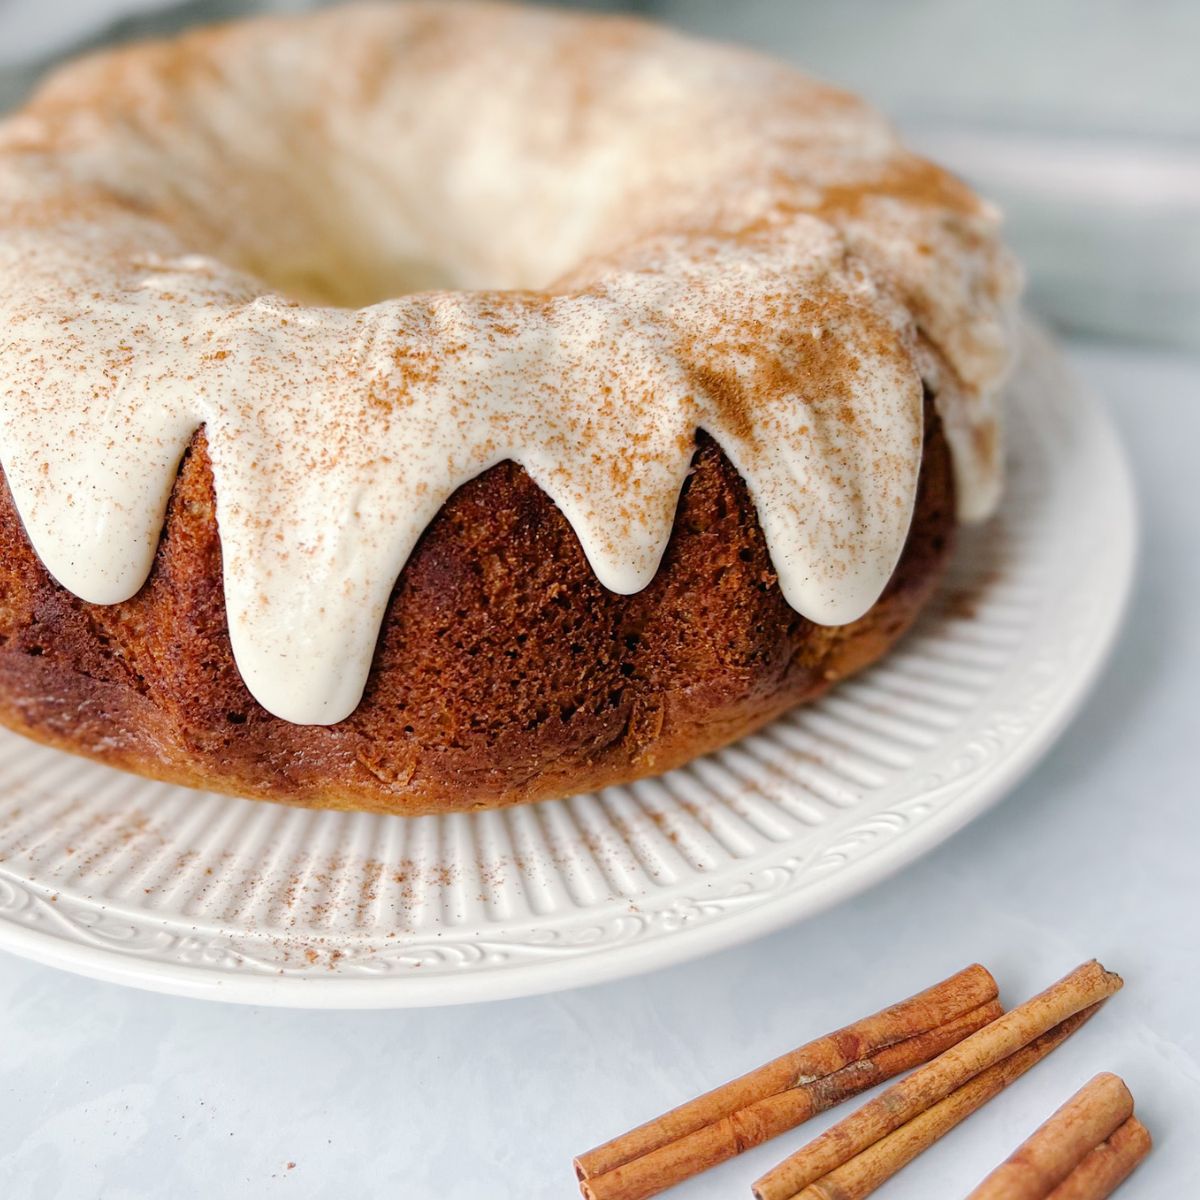 Spice bundt cake with caramel cream cheese frosting on a plate.